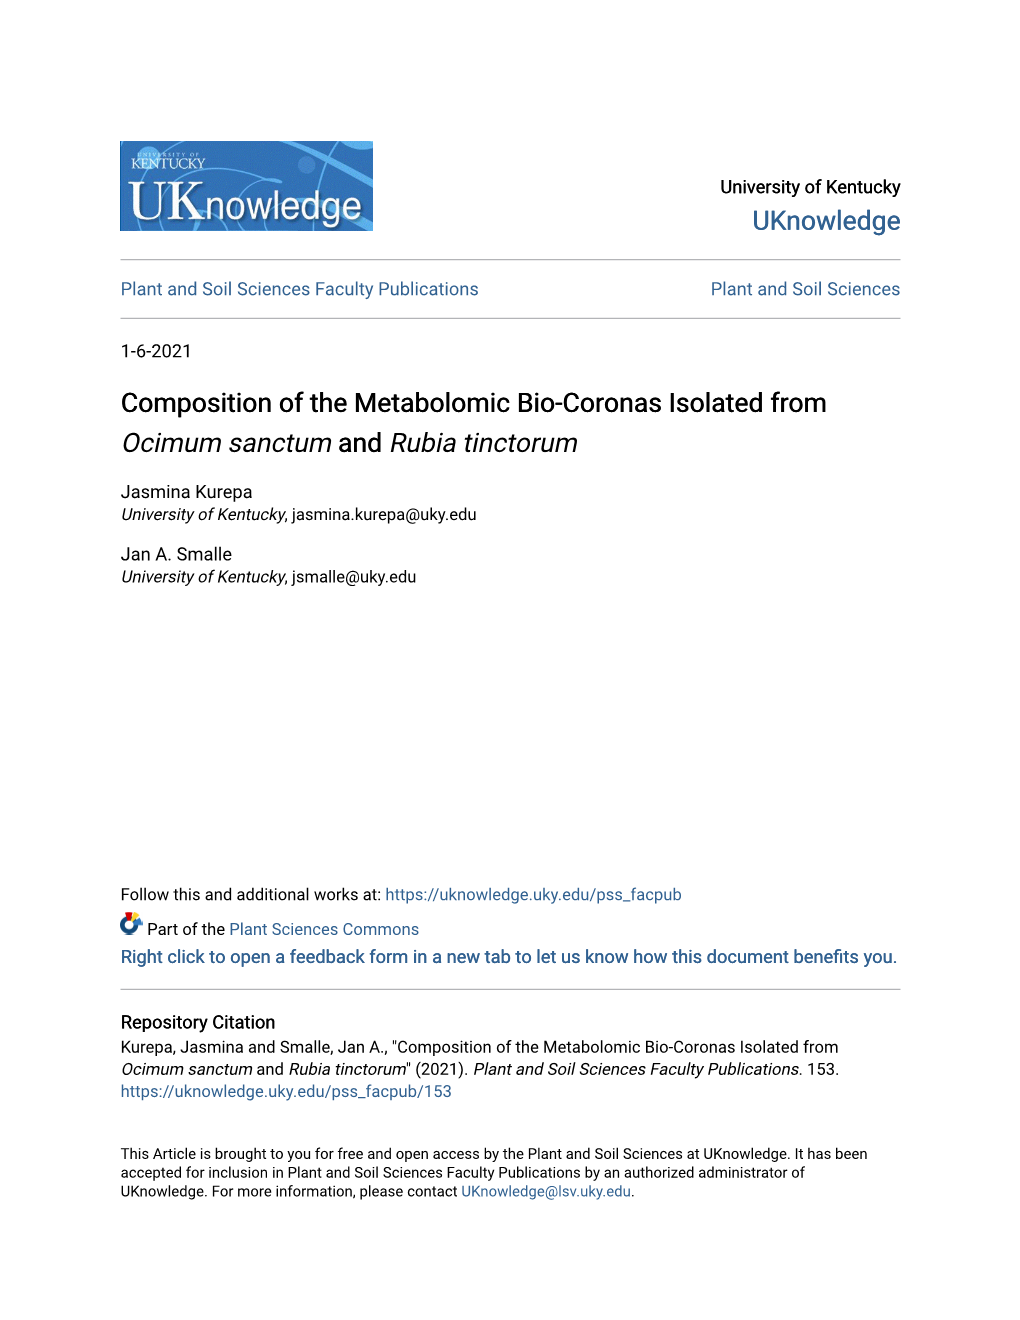 Composition of the Metabolomic Bio-Coronas Isolated from &lt;Em&gt;